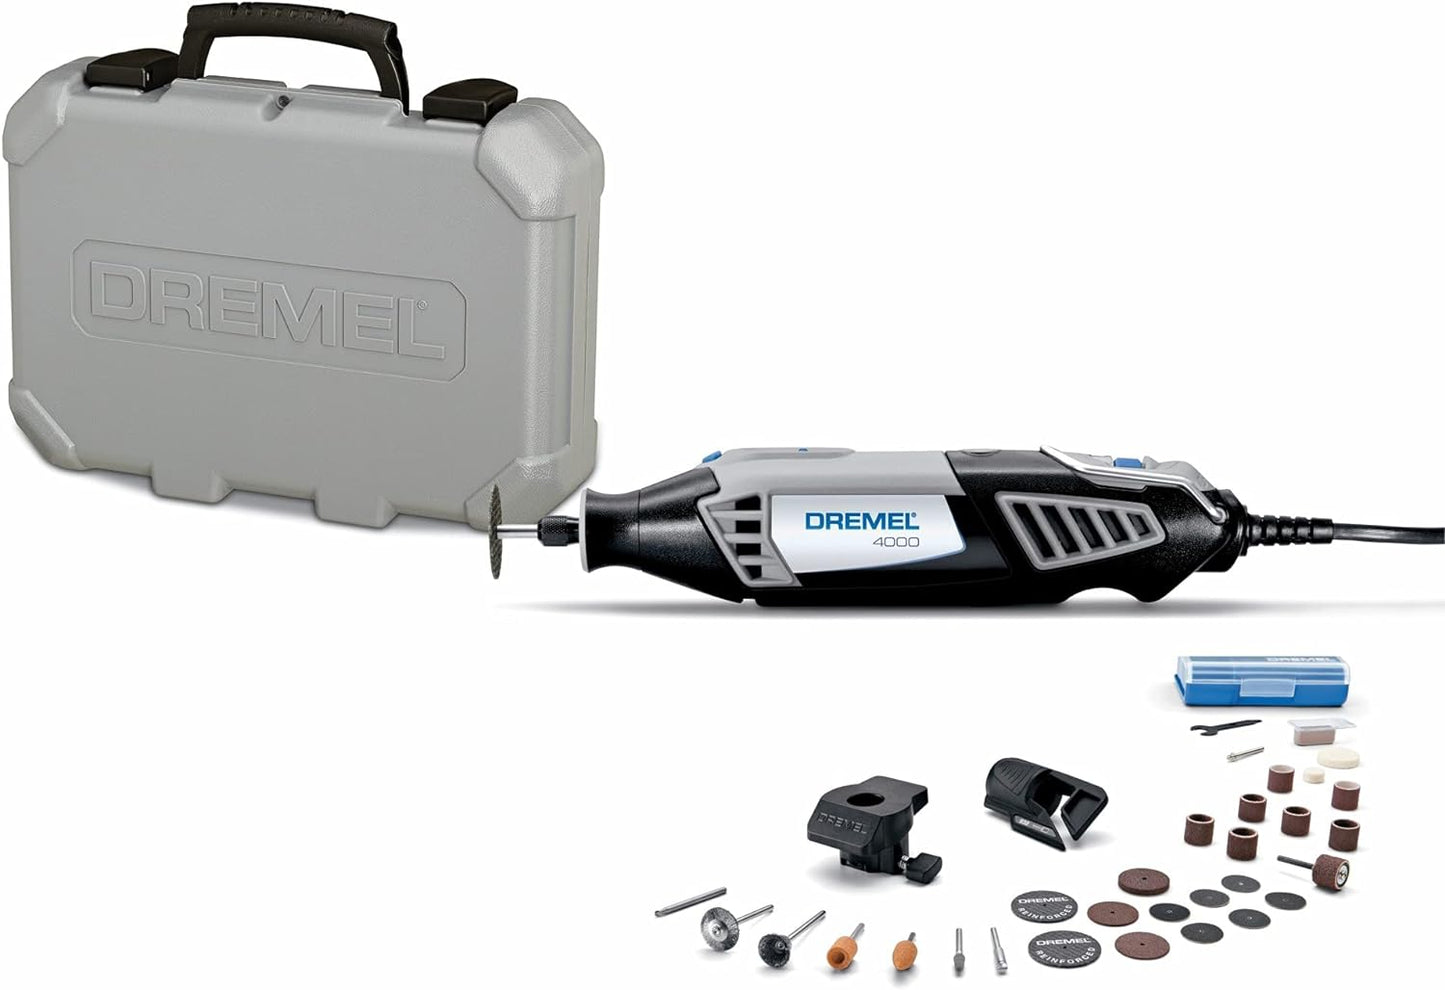 Dremel 4000-2/30 Variable Speed Rotary Tool Kit - Engraver, Polisher, and Sander- Perfect for Cutting, Detail Sanding, Engraving, Wood Carving, and Polishing- 2 Attachments & 30 Accessories